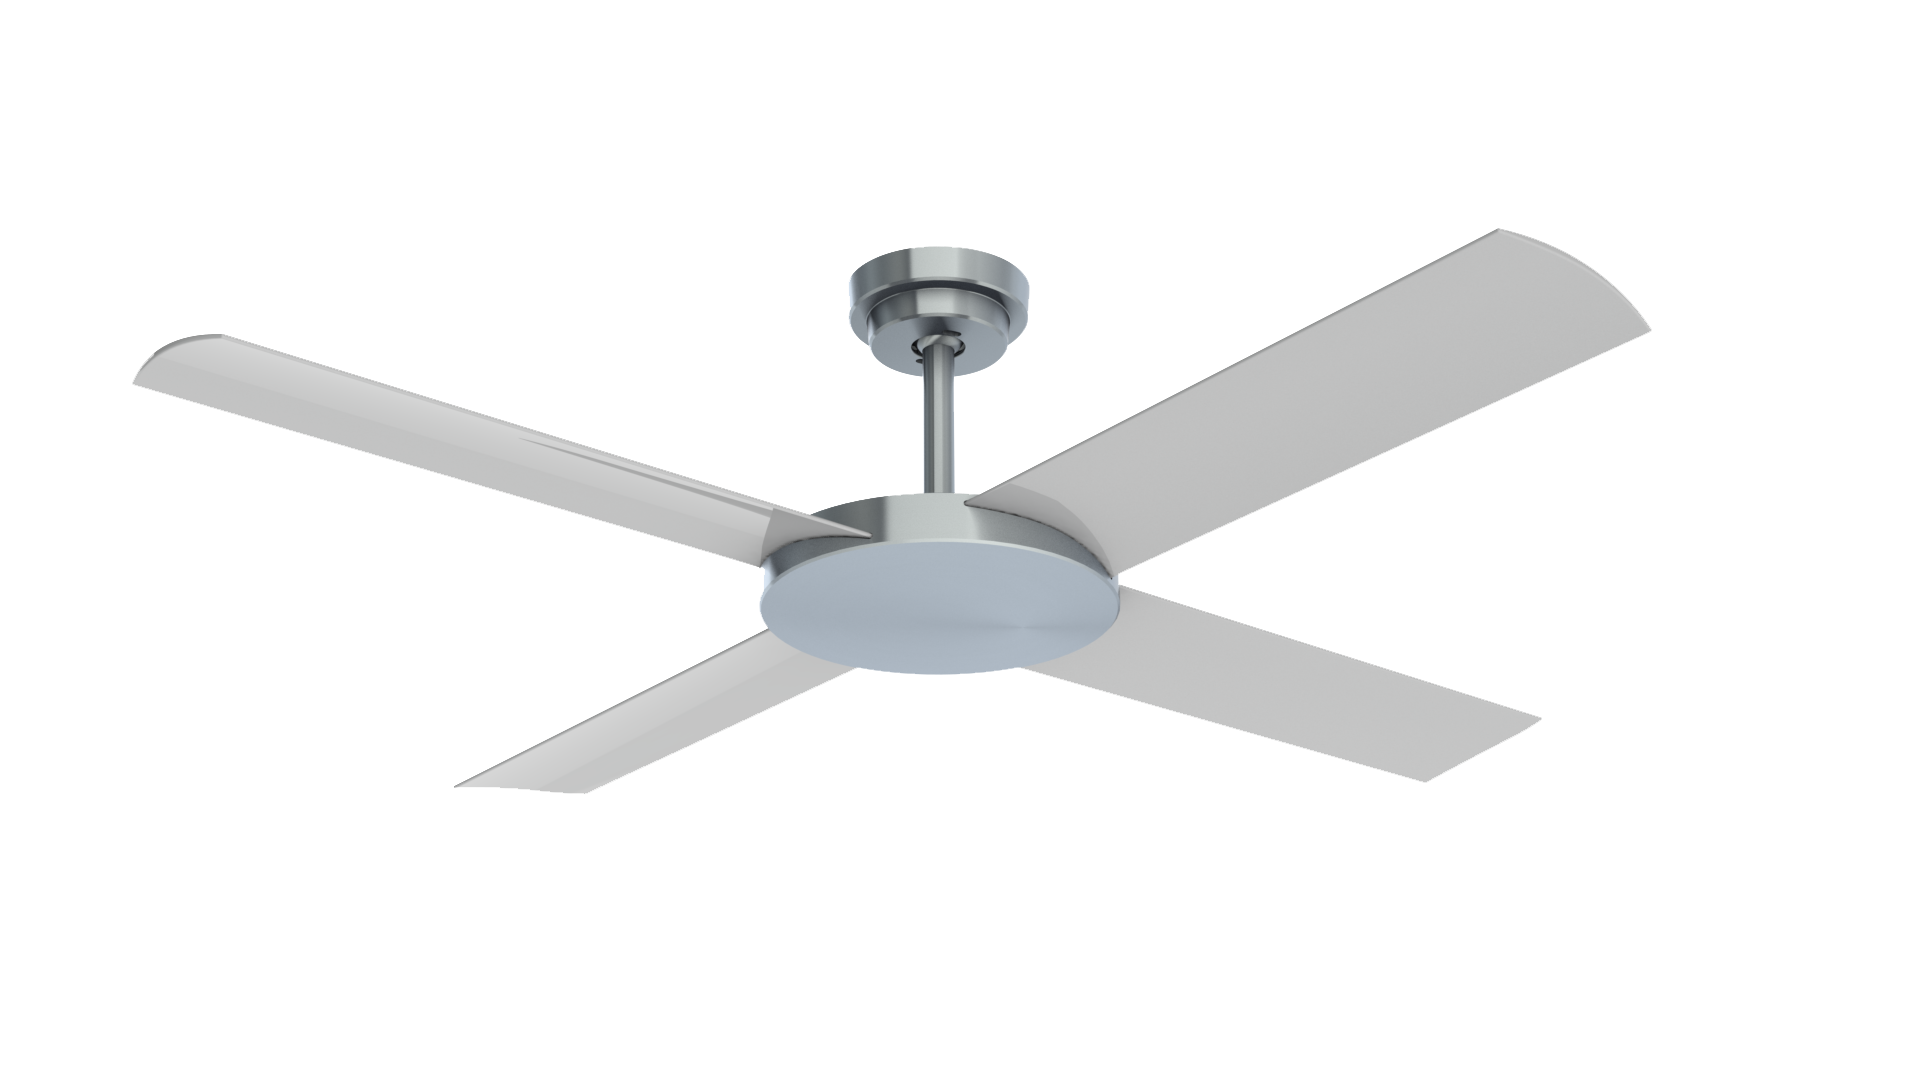 Revolution 3 Brushed Aluminium 52" Indoor/Outdoor Ceiling Fan with Wall Control